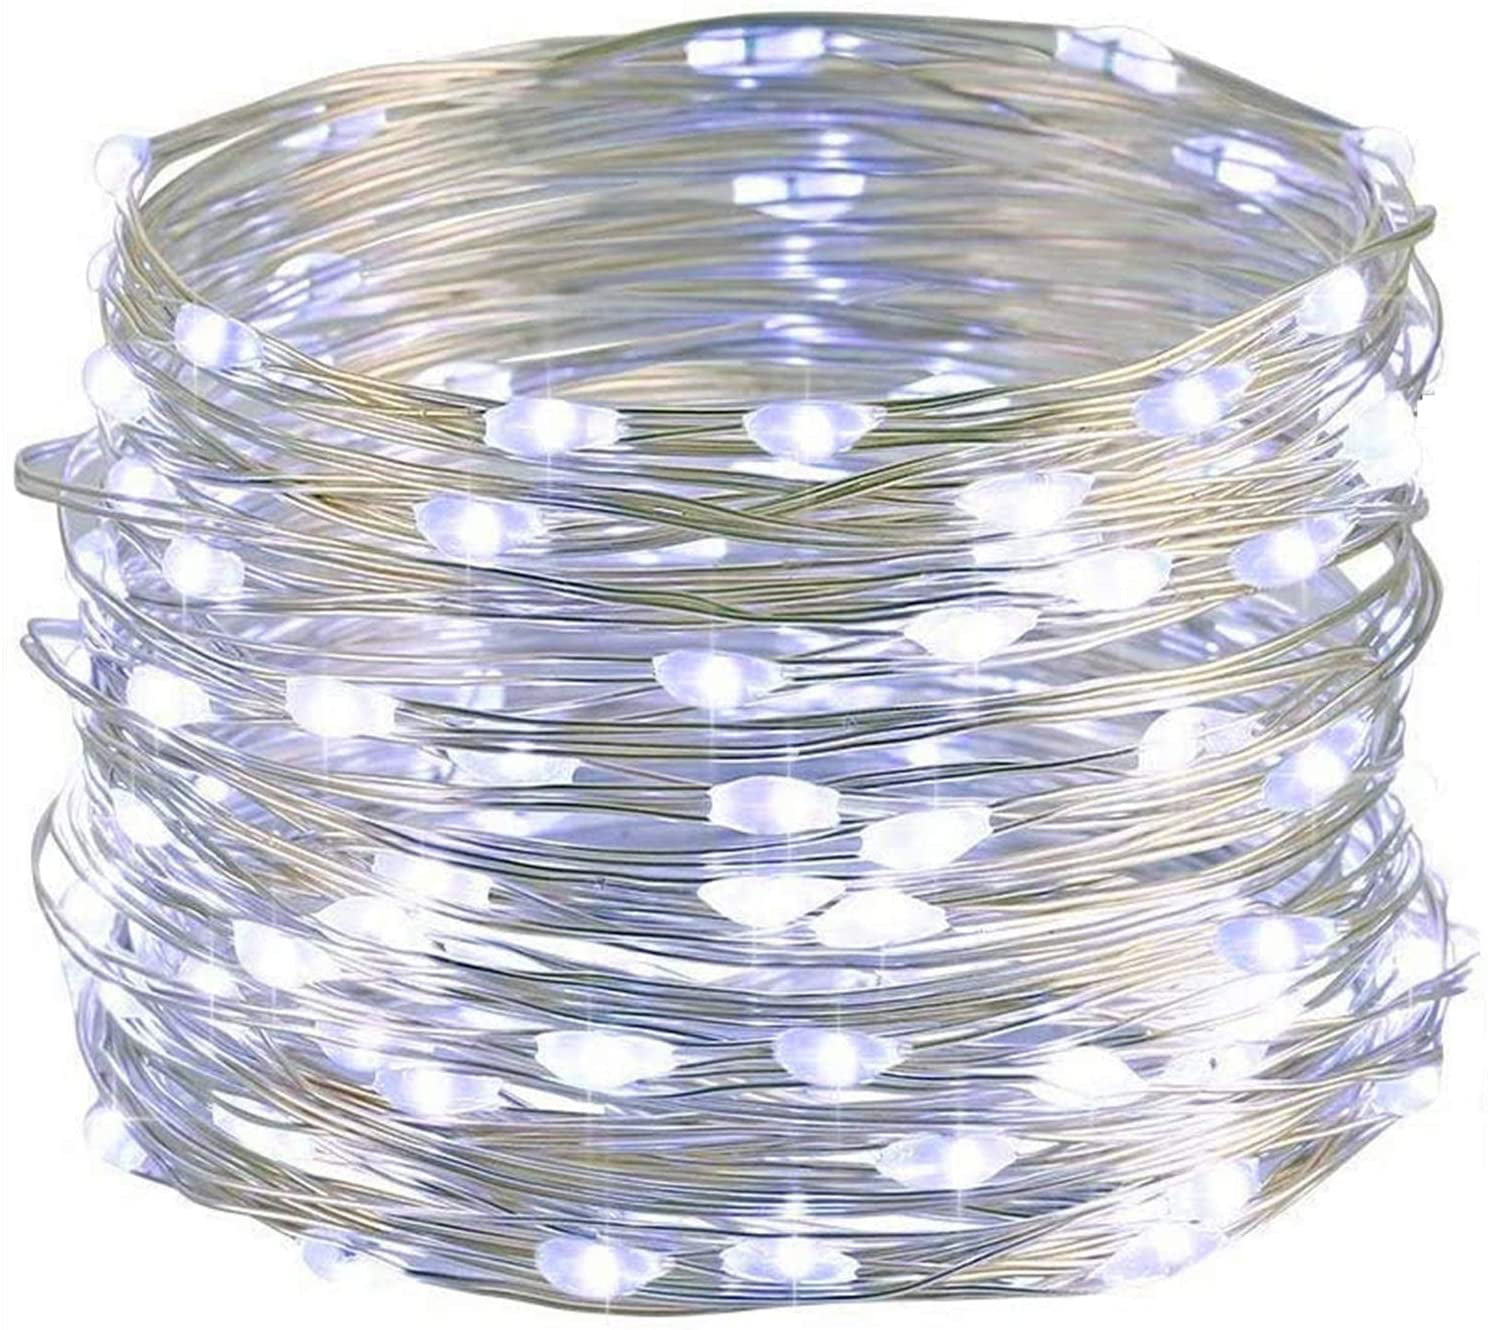 USB 10M 100LED 8-Mode String Copper Wire Fairy Lights Wedding Xmas Party Decor 